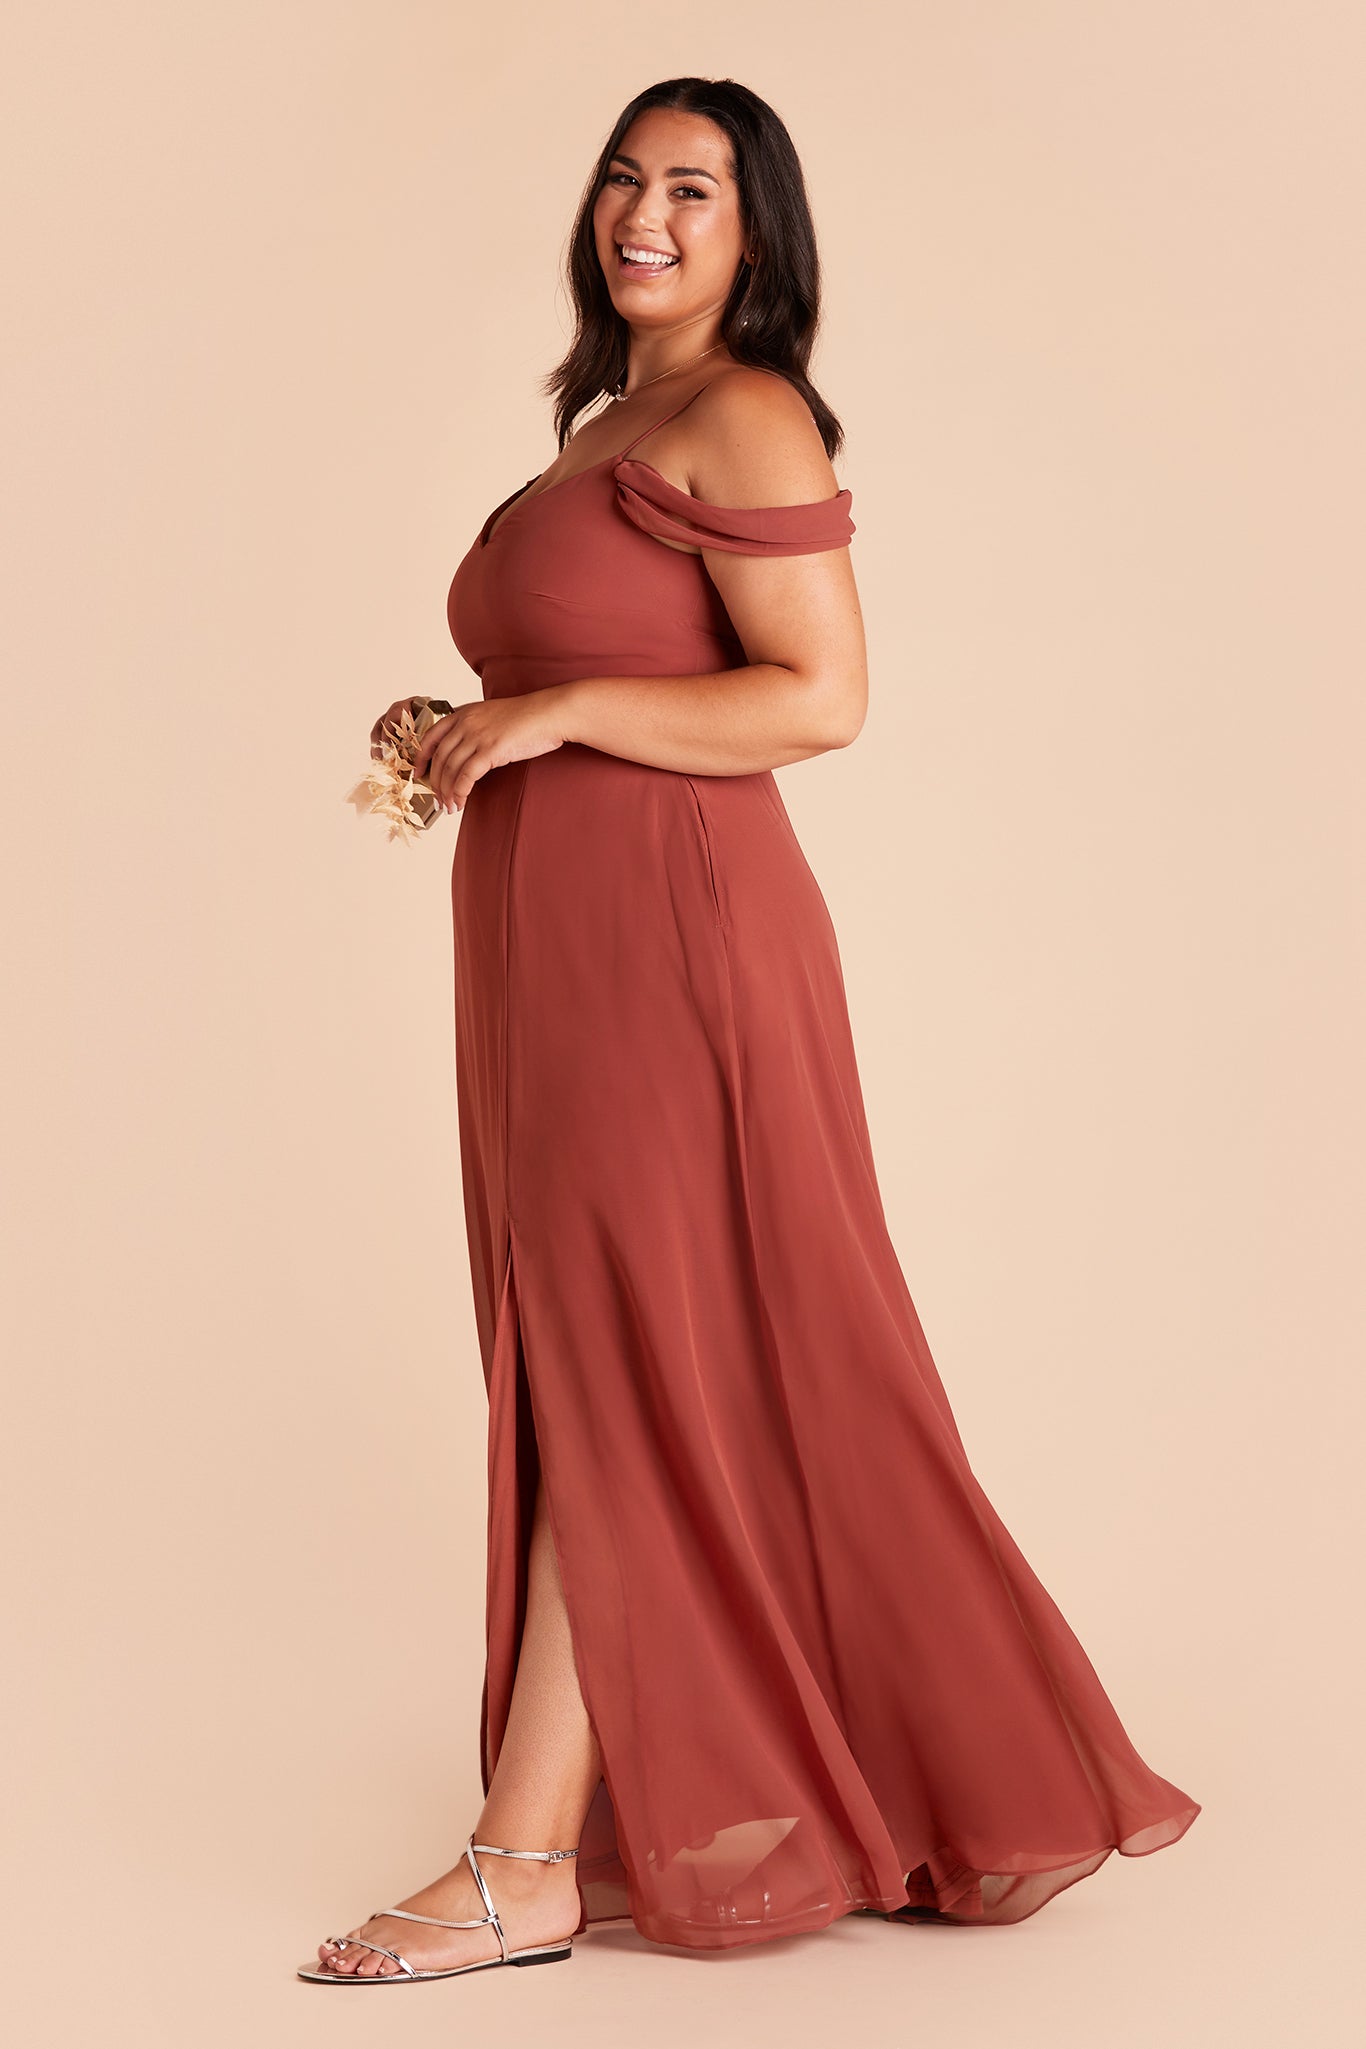 Devin convertible plus size bridesmaids dress with slit in spice chiffon by Birdy Grey, side view